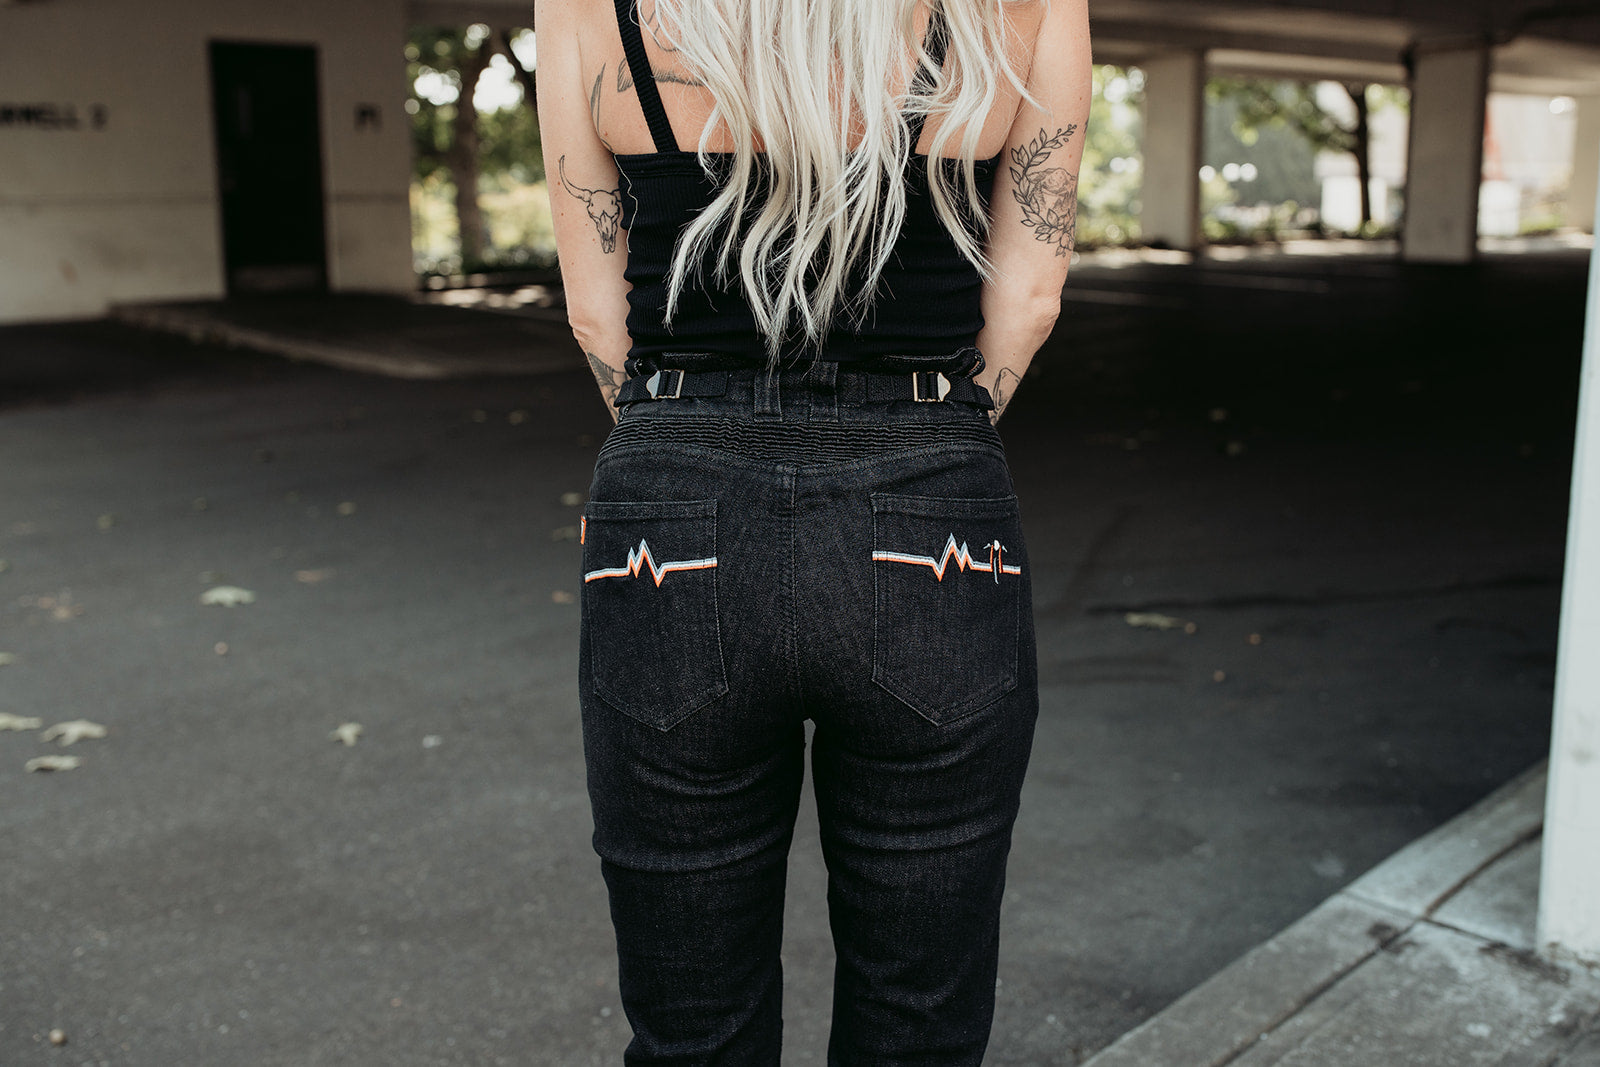 A bottom of a woman wearing high waist lady motorcycle jeans